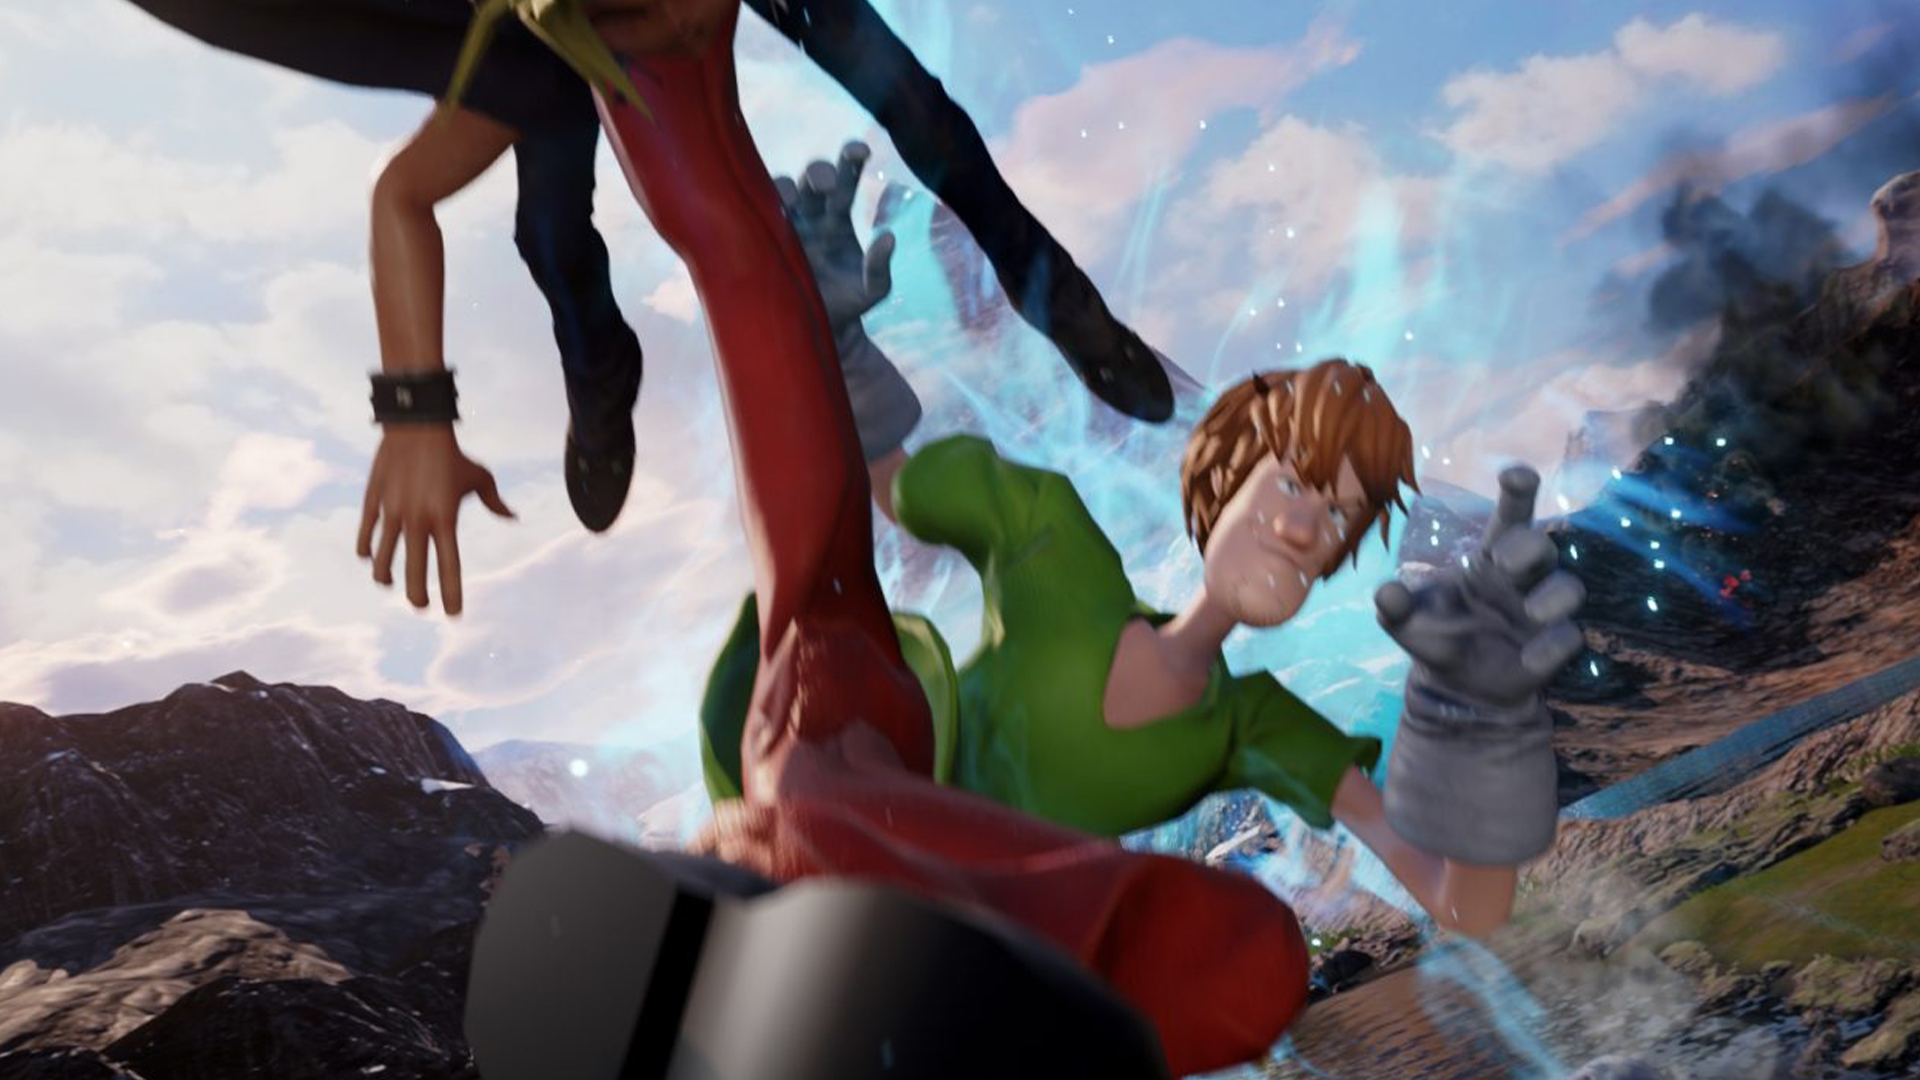 Shaggy's been modded into Jump Force, because of course he has